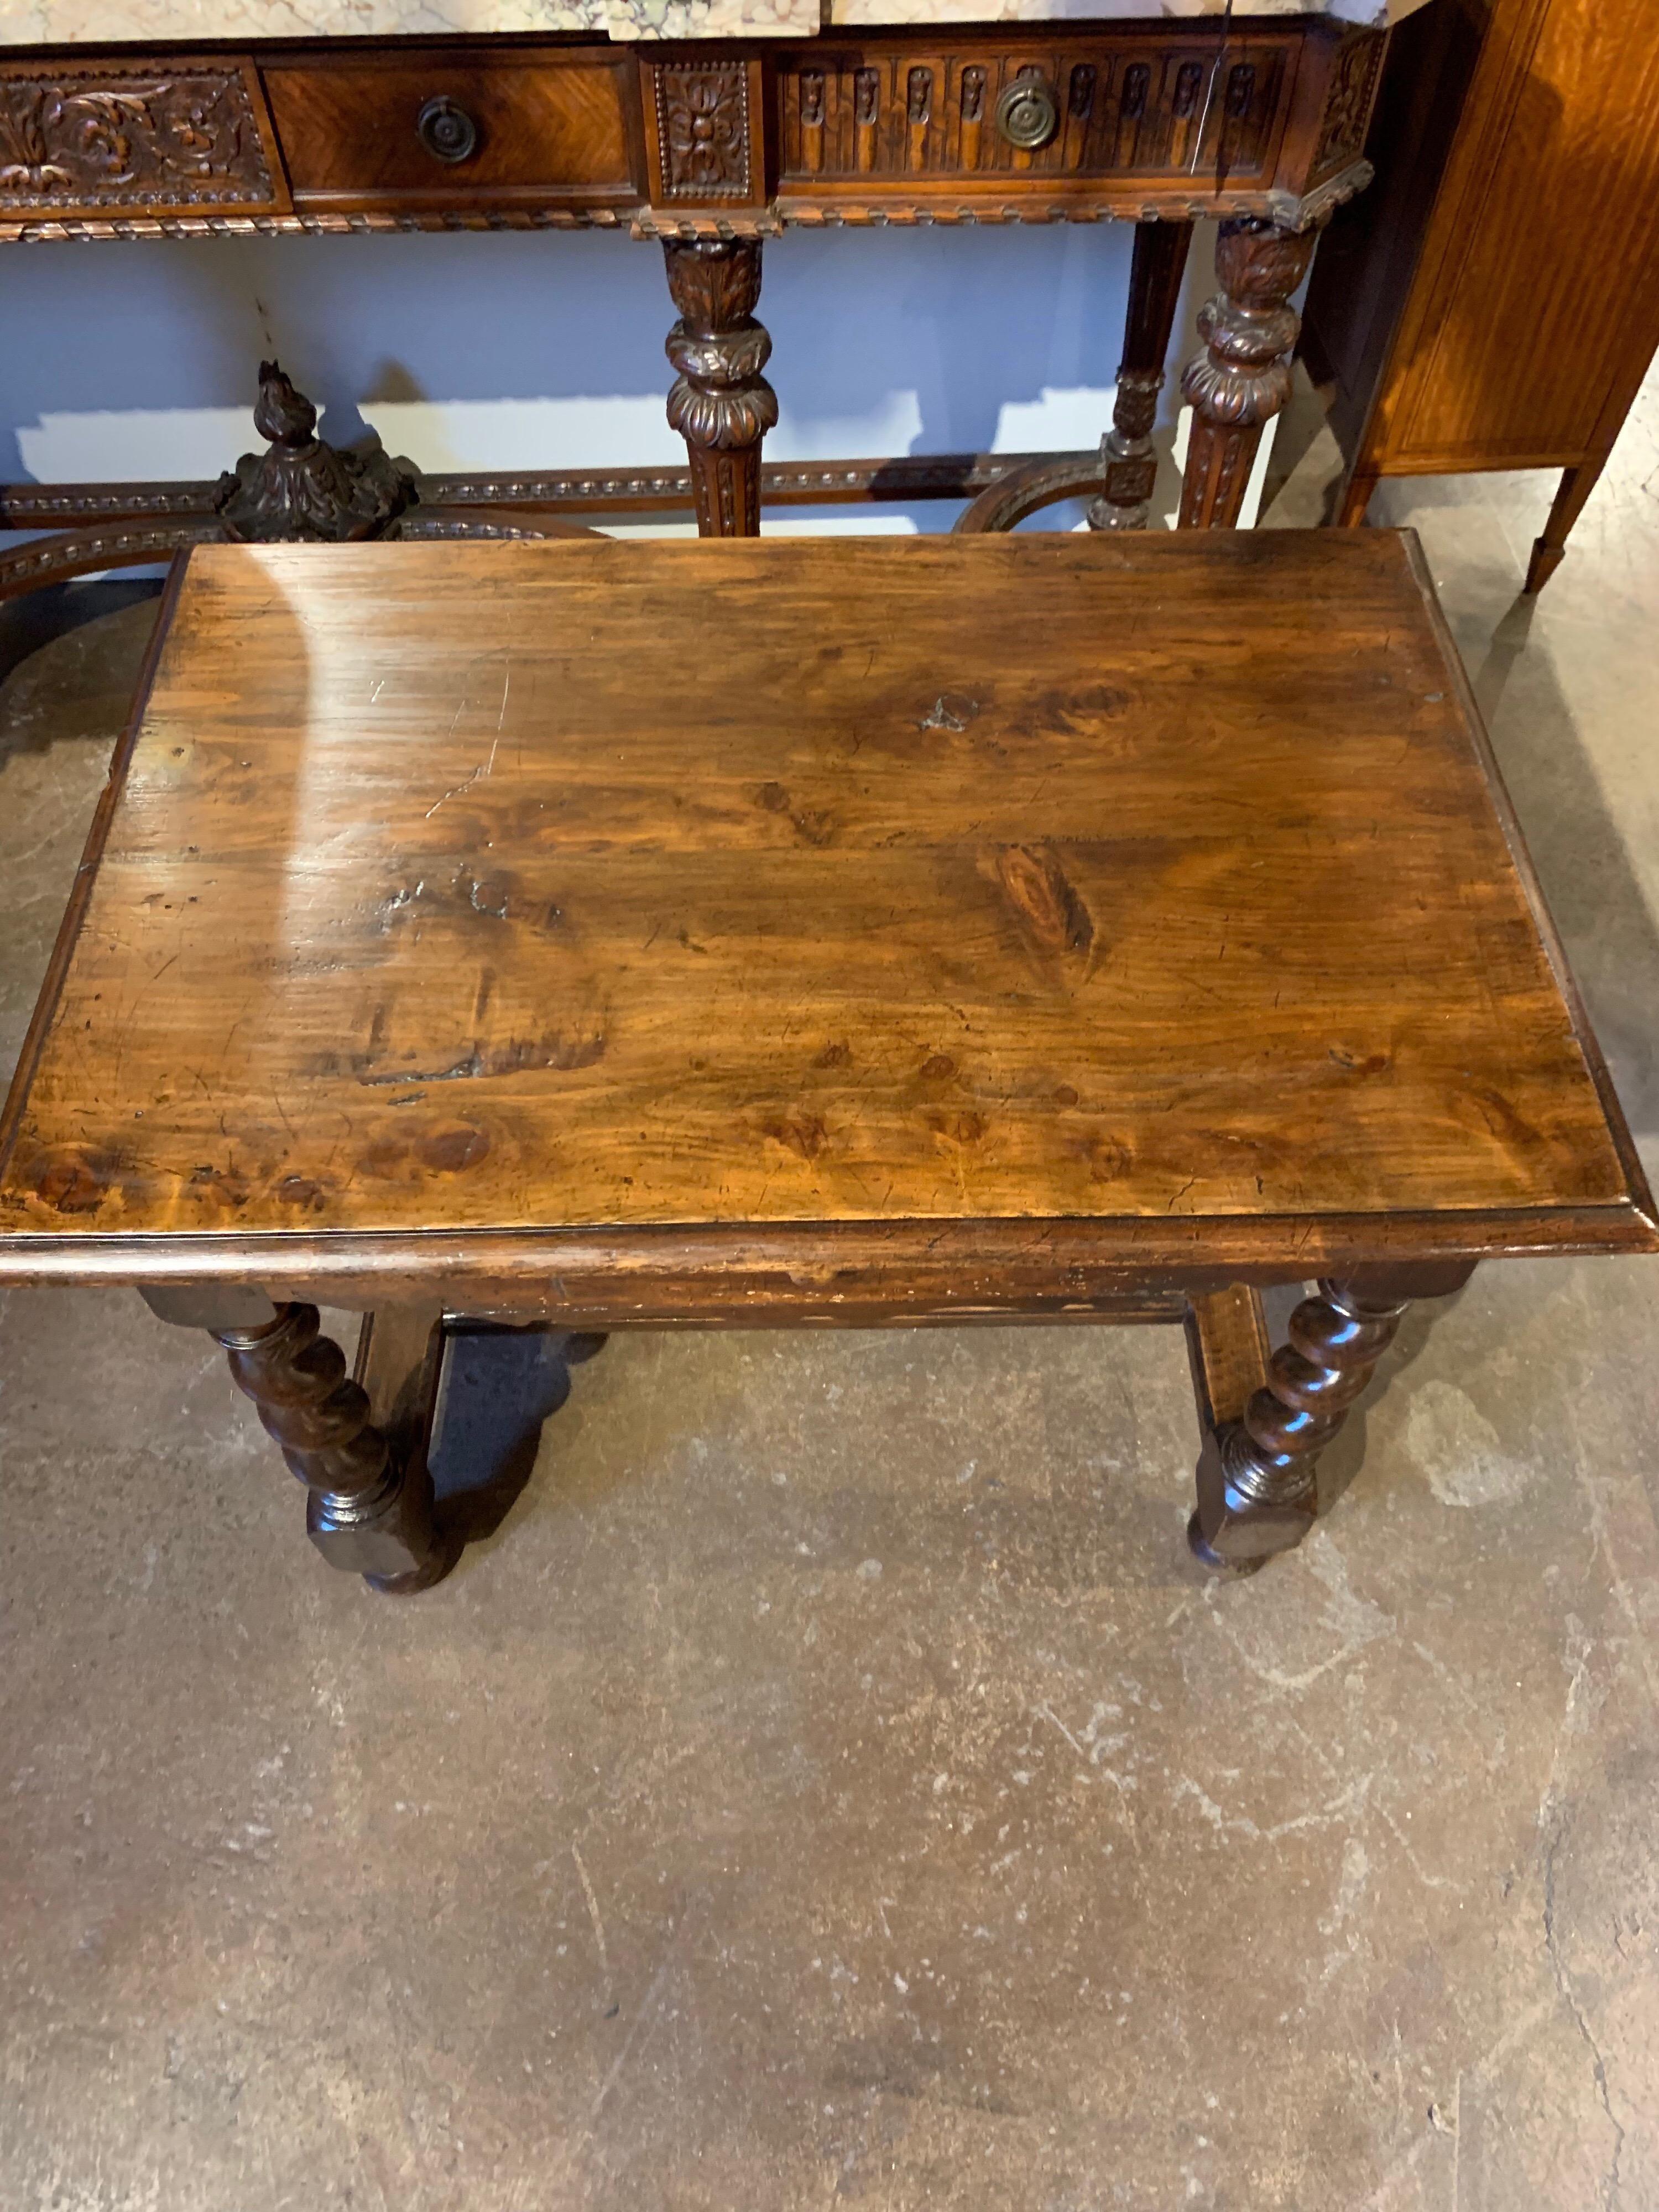 Very handsome antique French walnut table with barley twist legs. Note the peg construction and hand dovetailed drawer. A pure 18th century piece. In very nice condition with good old rich patina.